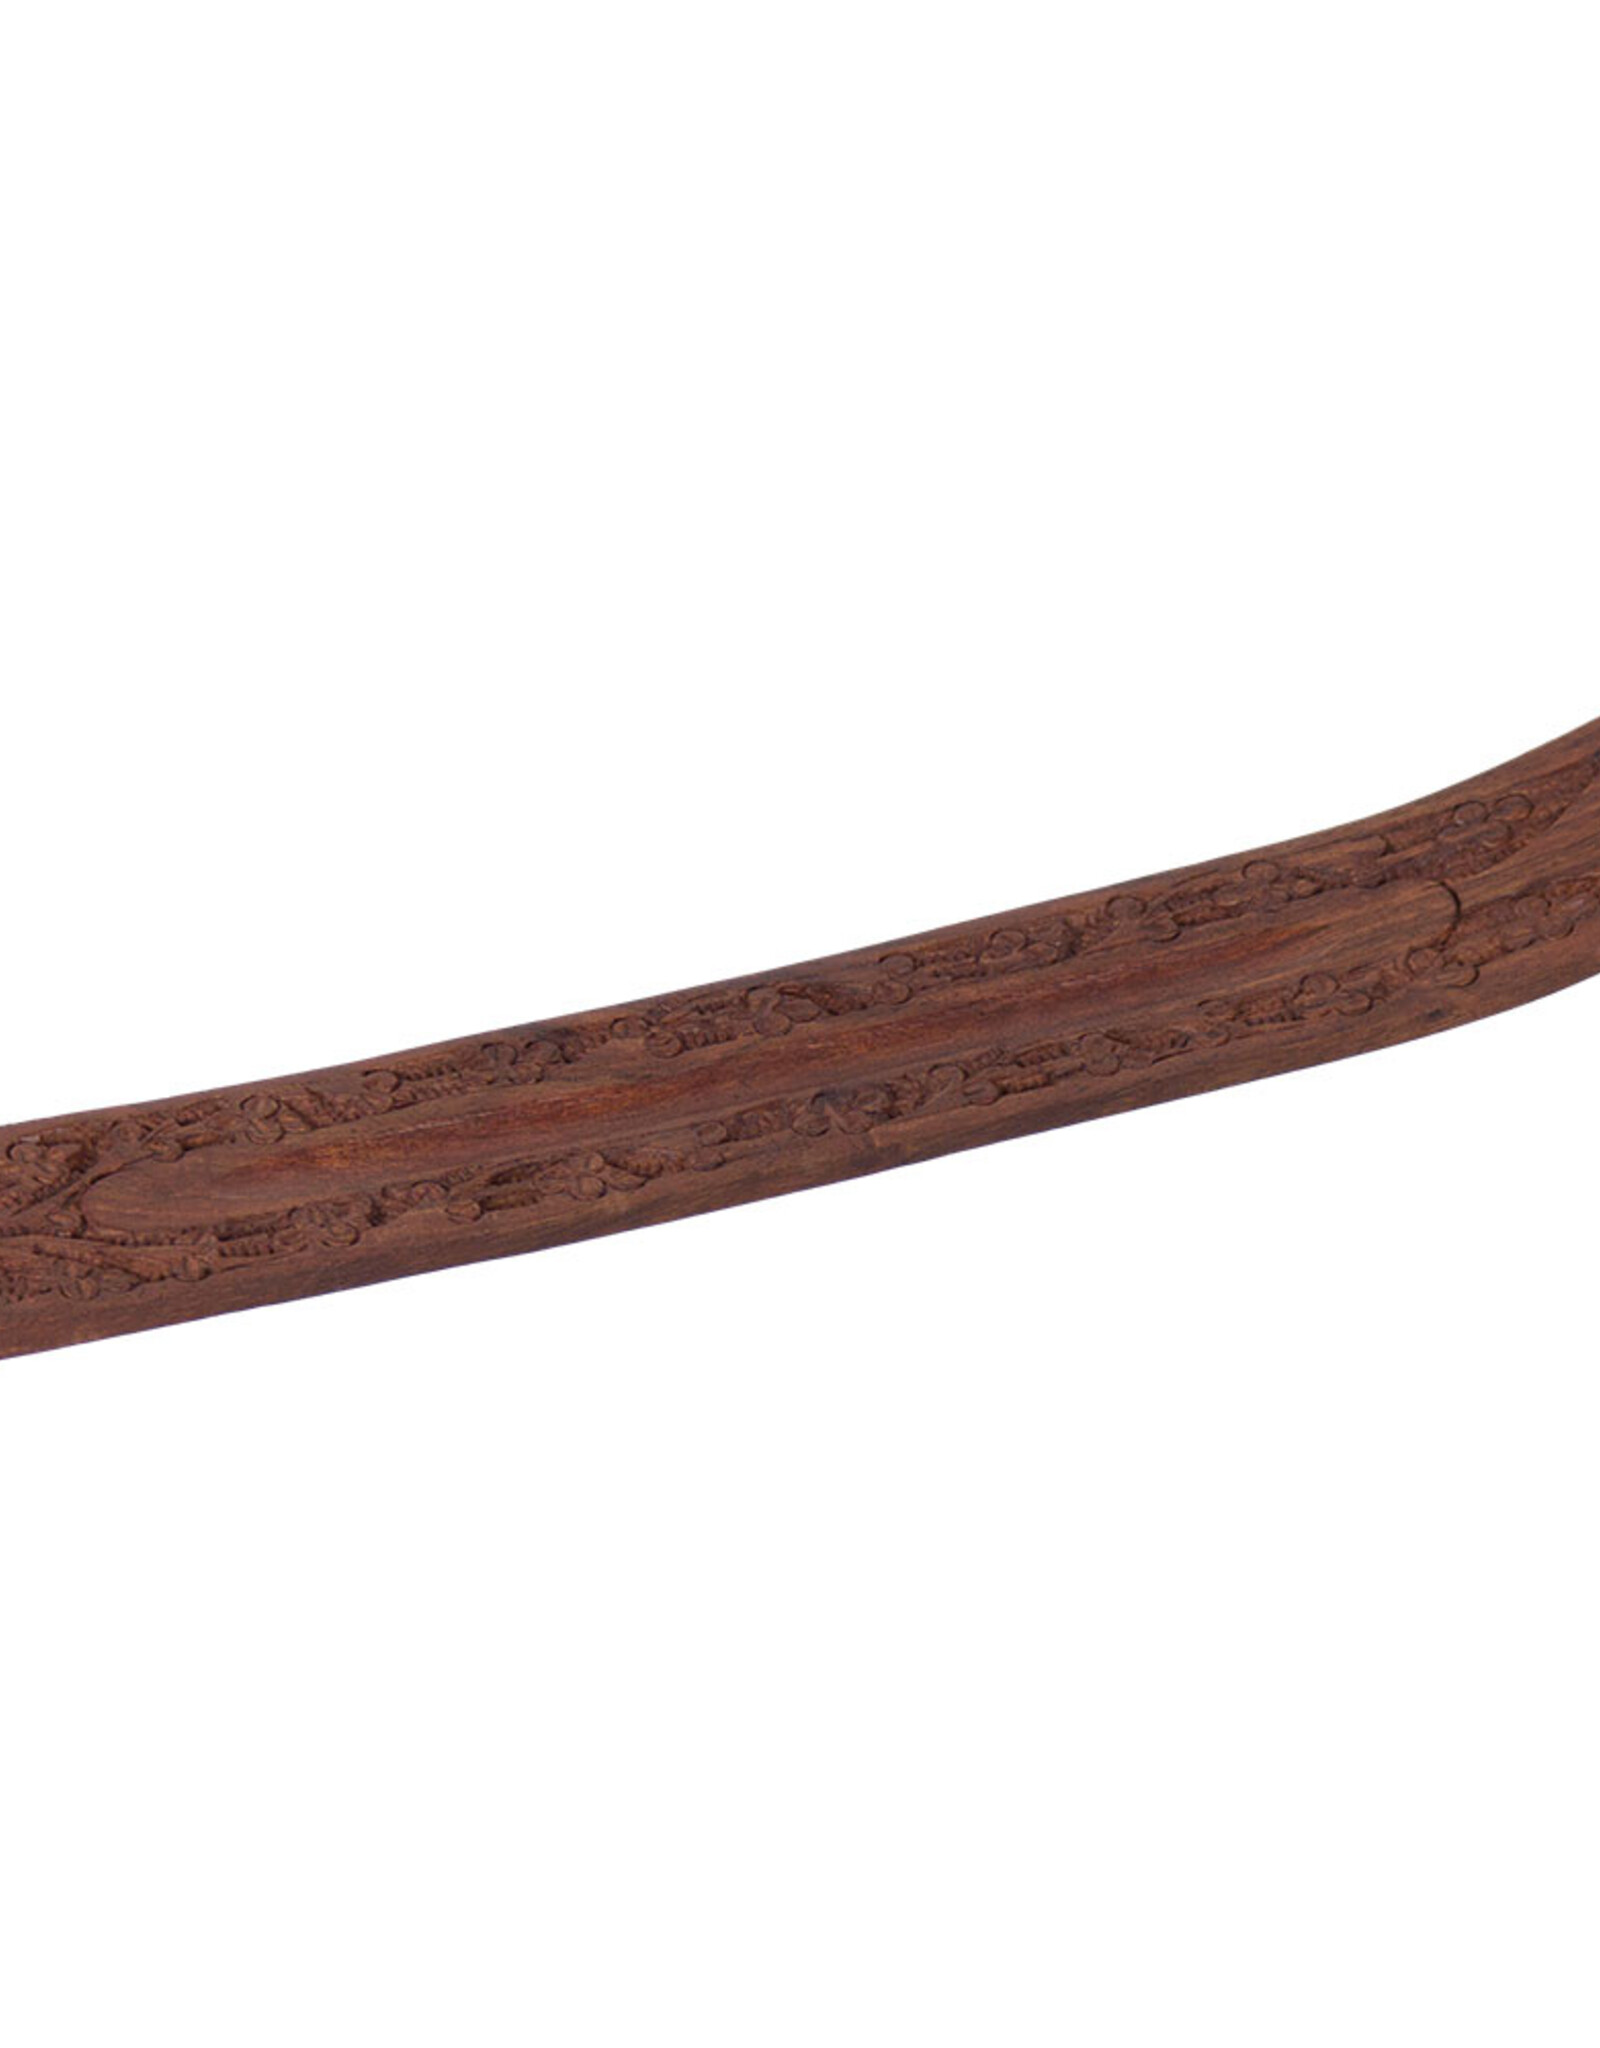 Long wood incense holder (ash-catcher) with carved flowers